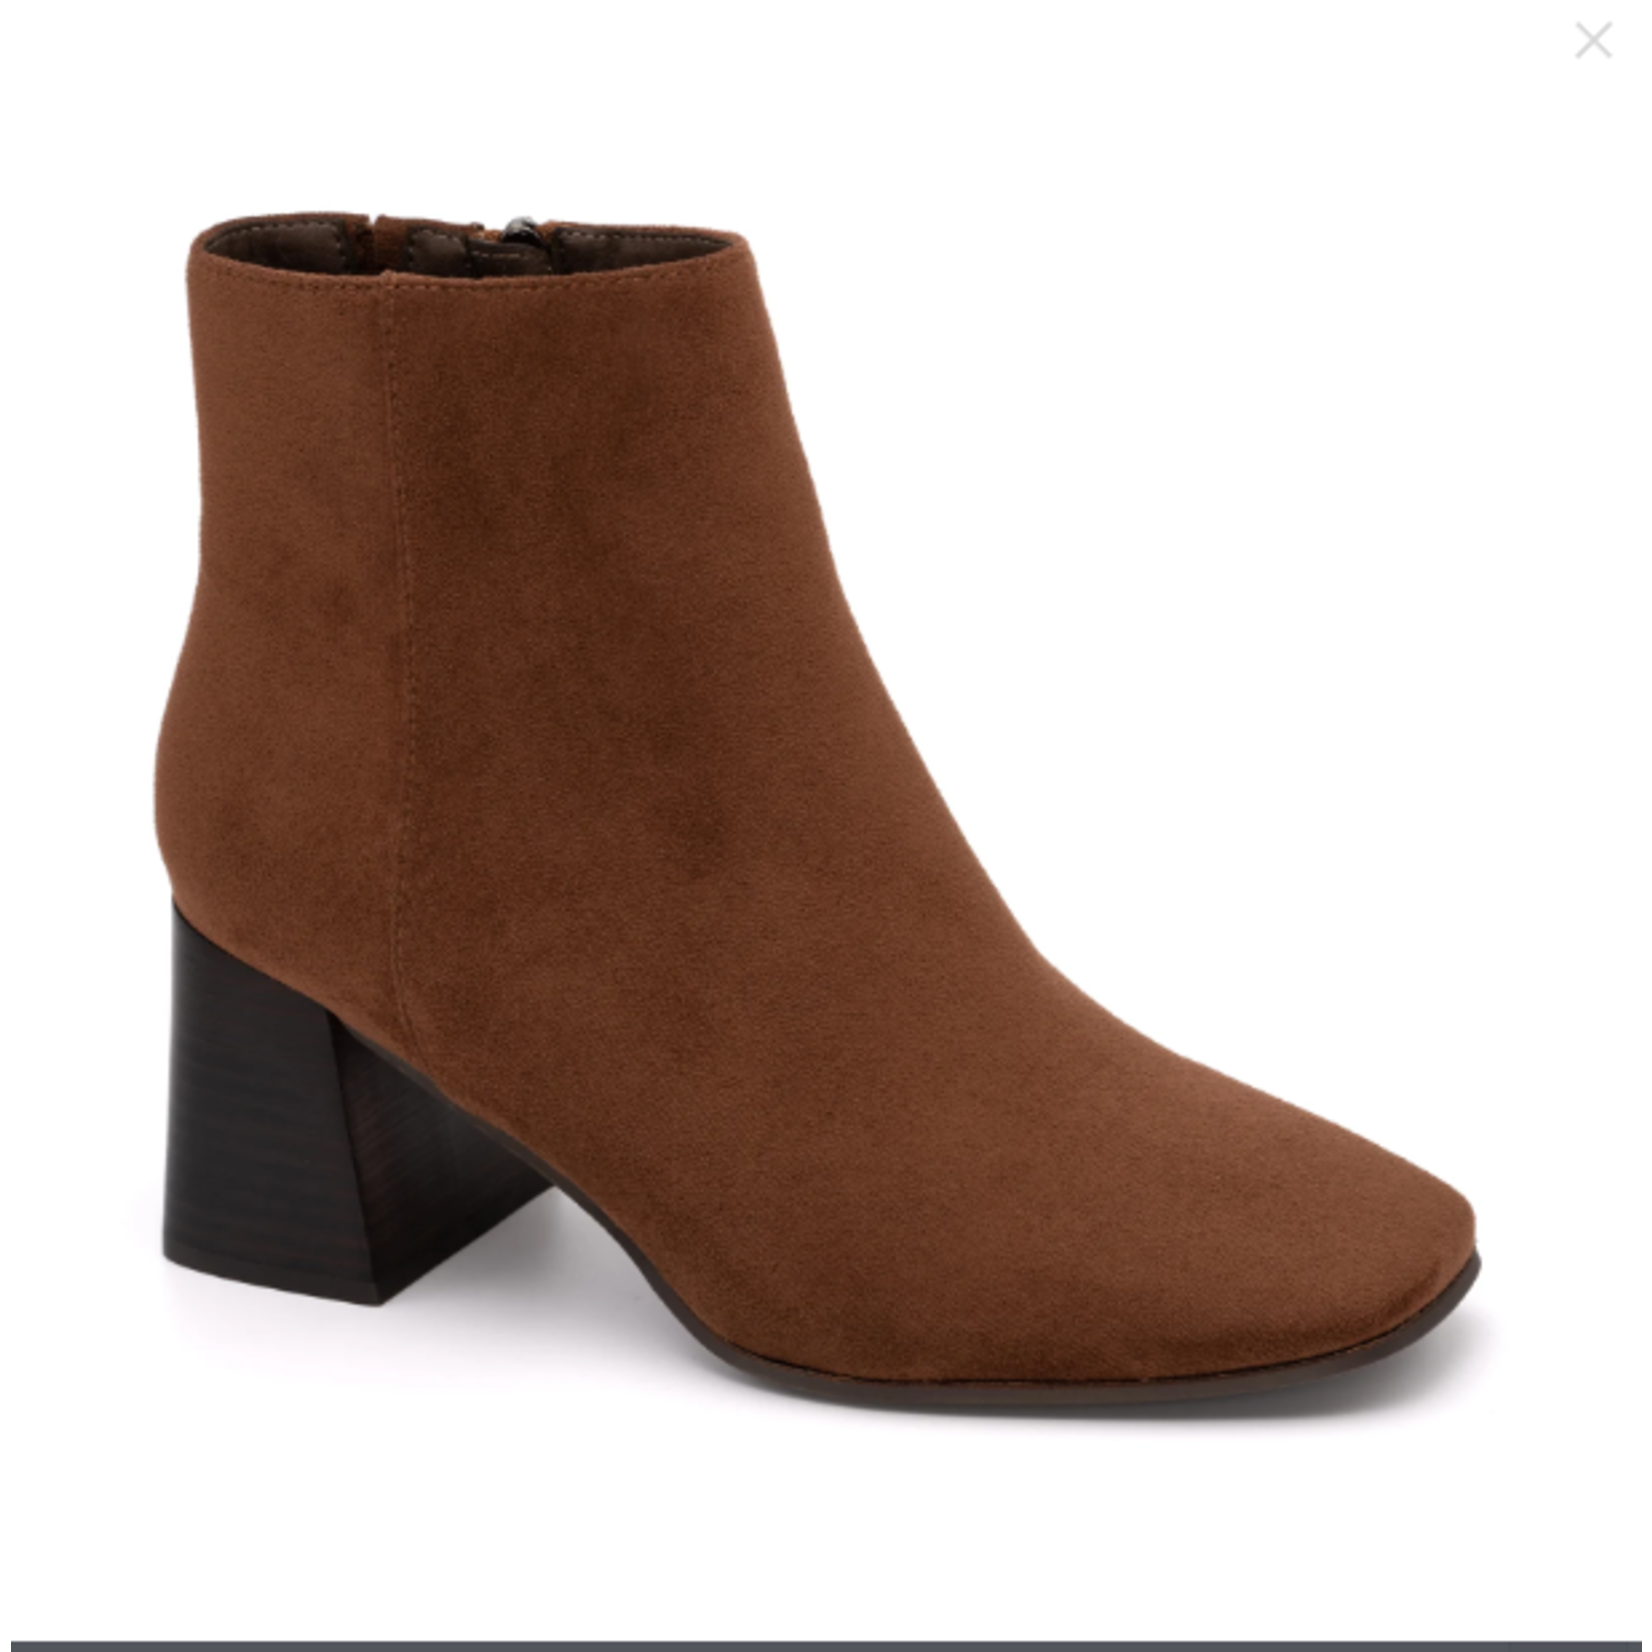 Corkys Corkys Felicia Boots Chestnut Suede